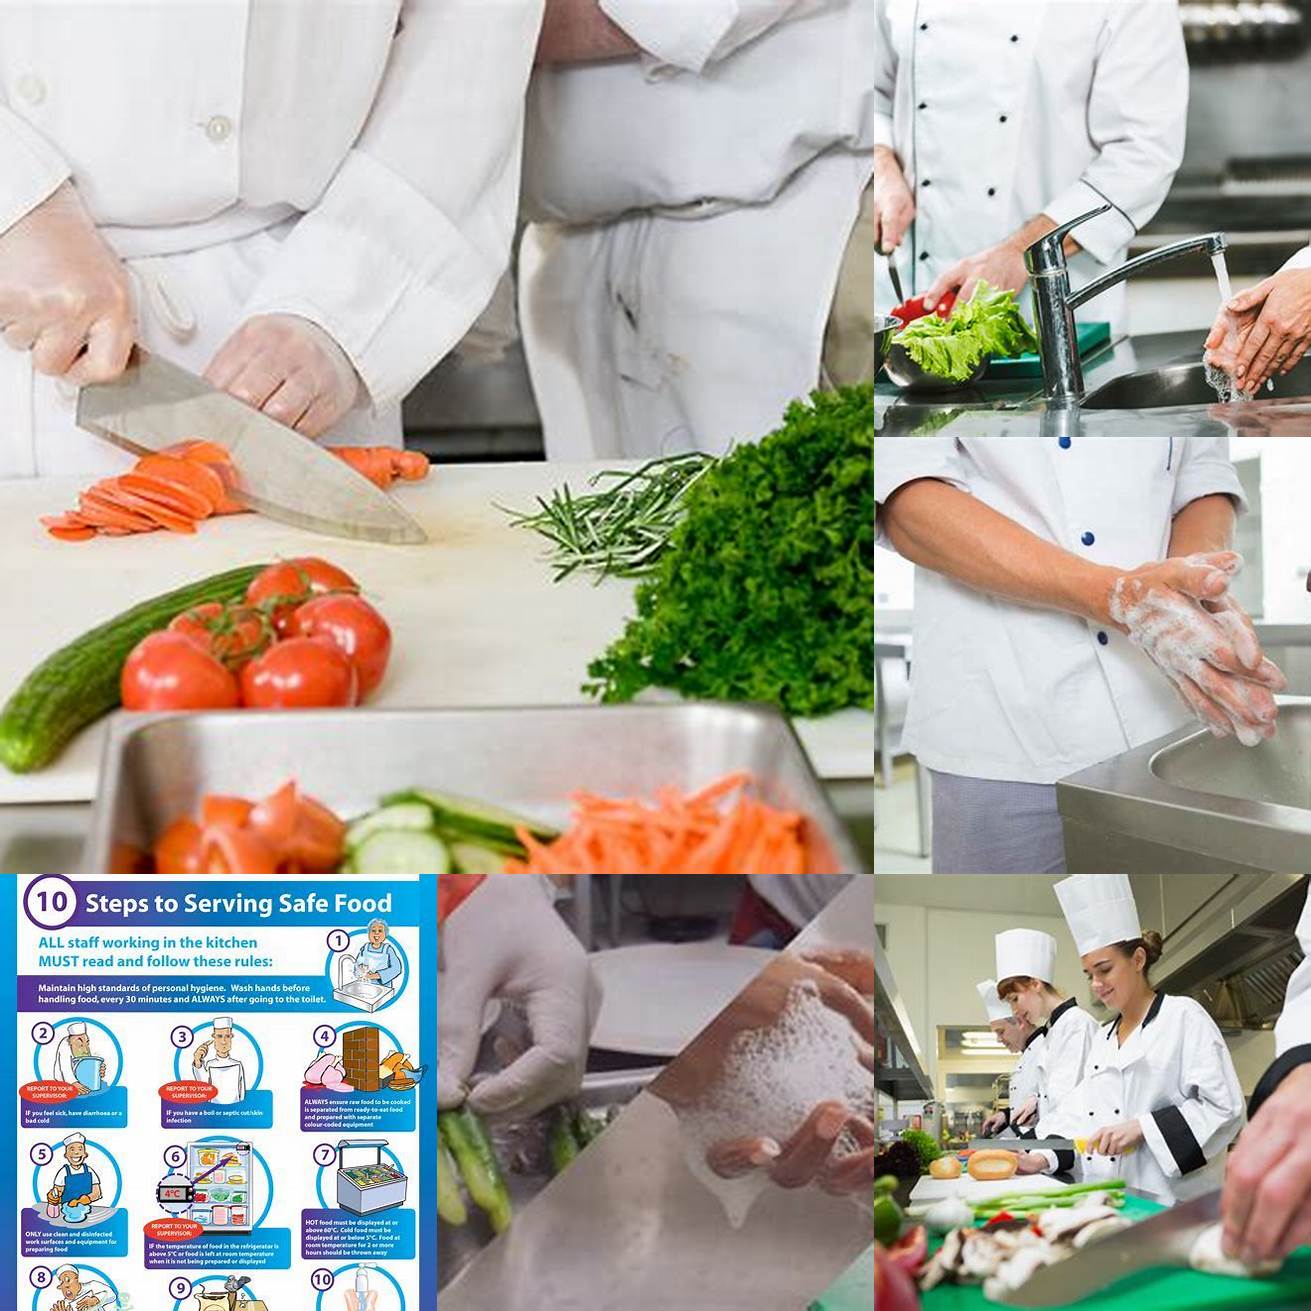 3 Employee training Train your staff on proper food handling and safety procedures and enforce strict hygiene policies